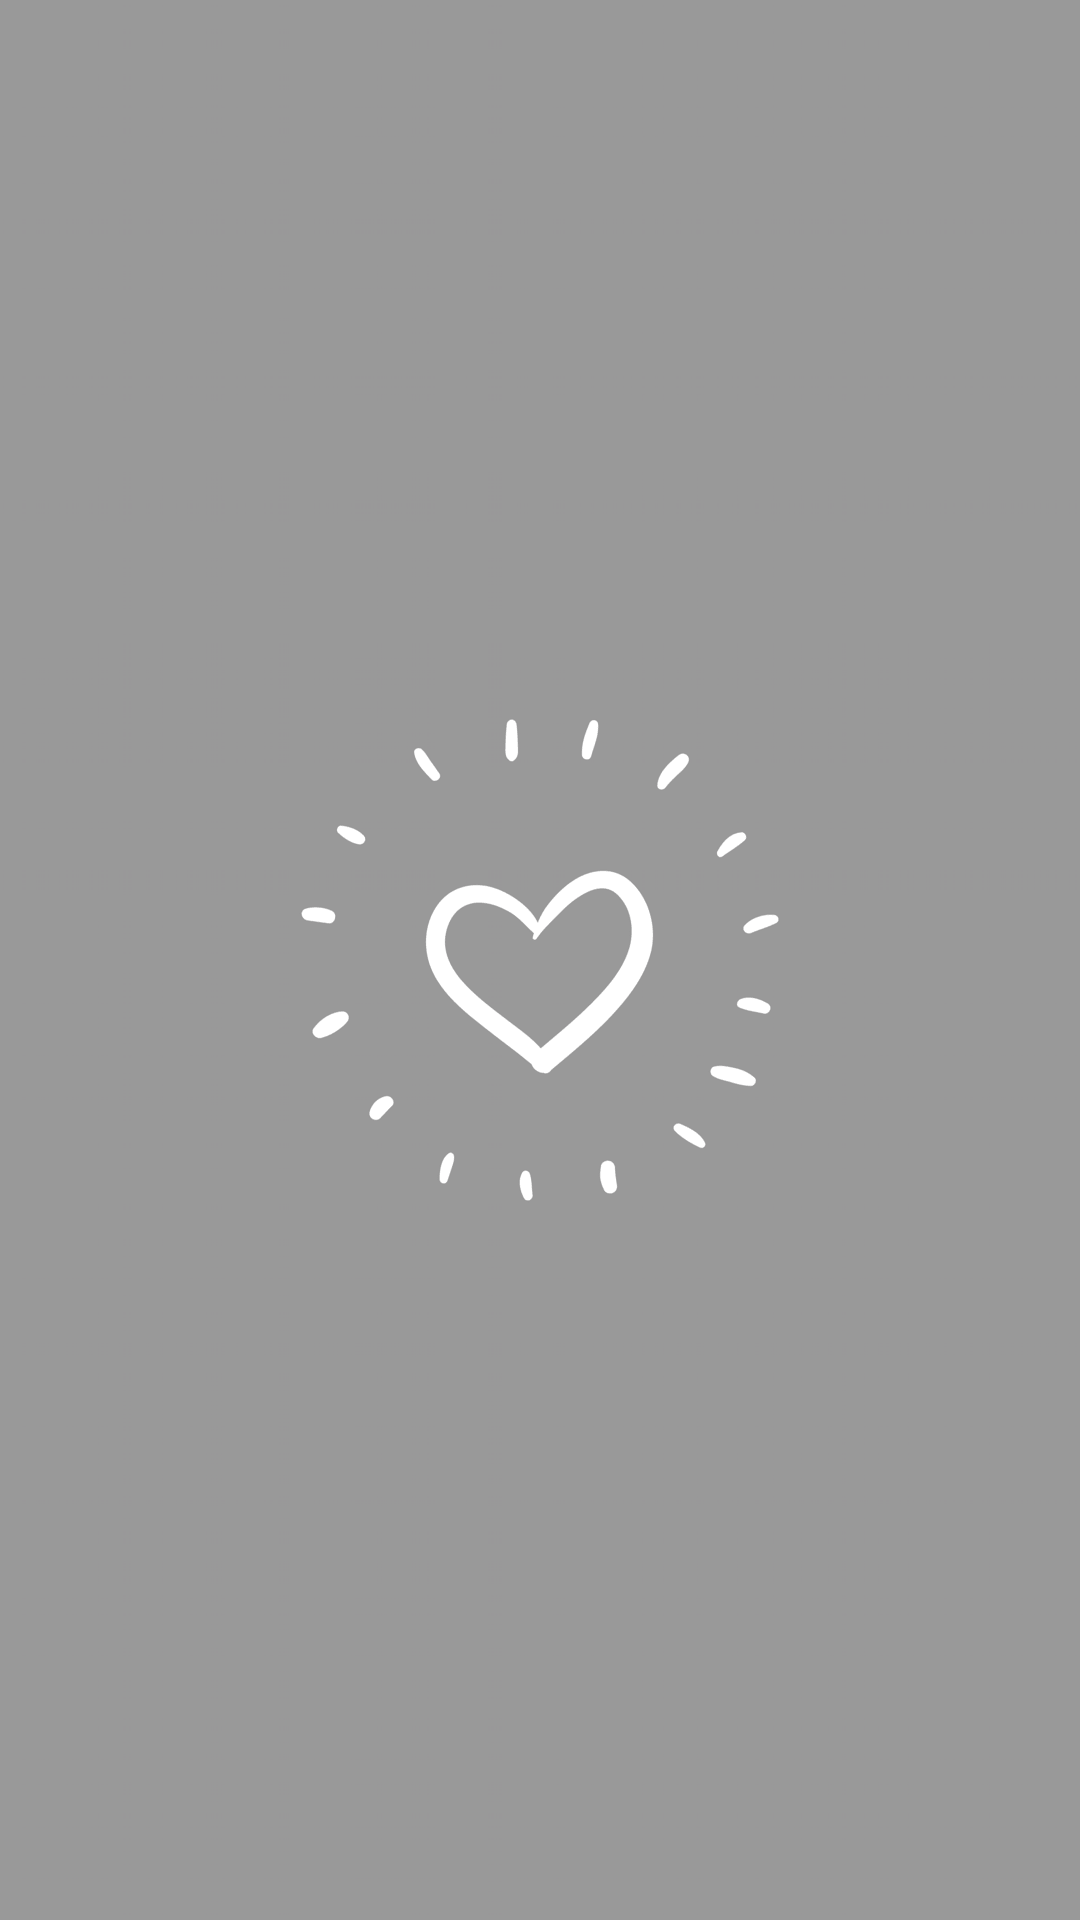 A heart shaped sun on gray background - Gray